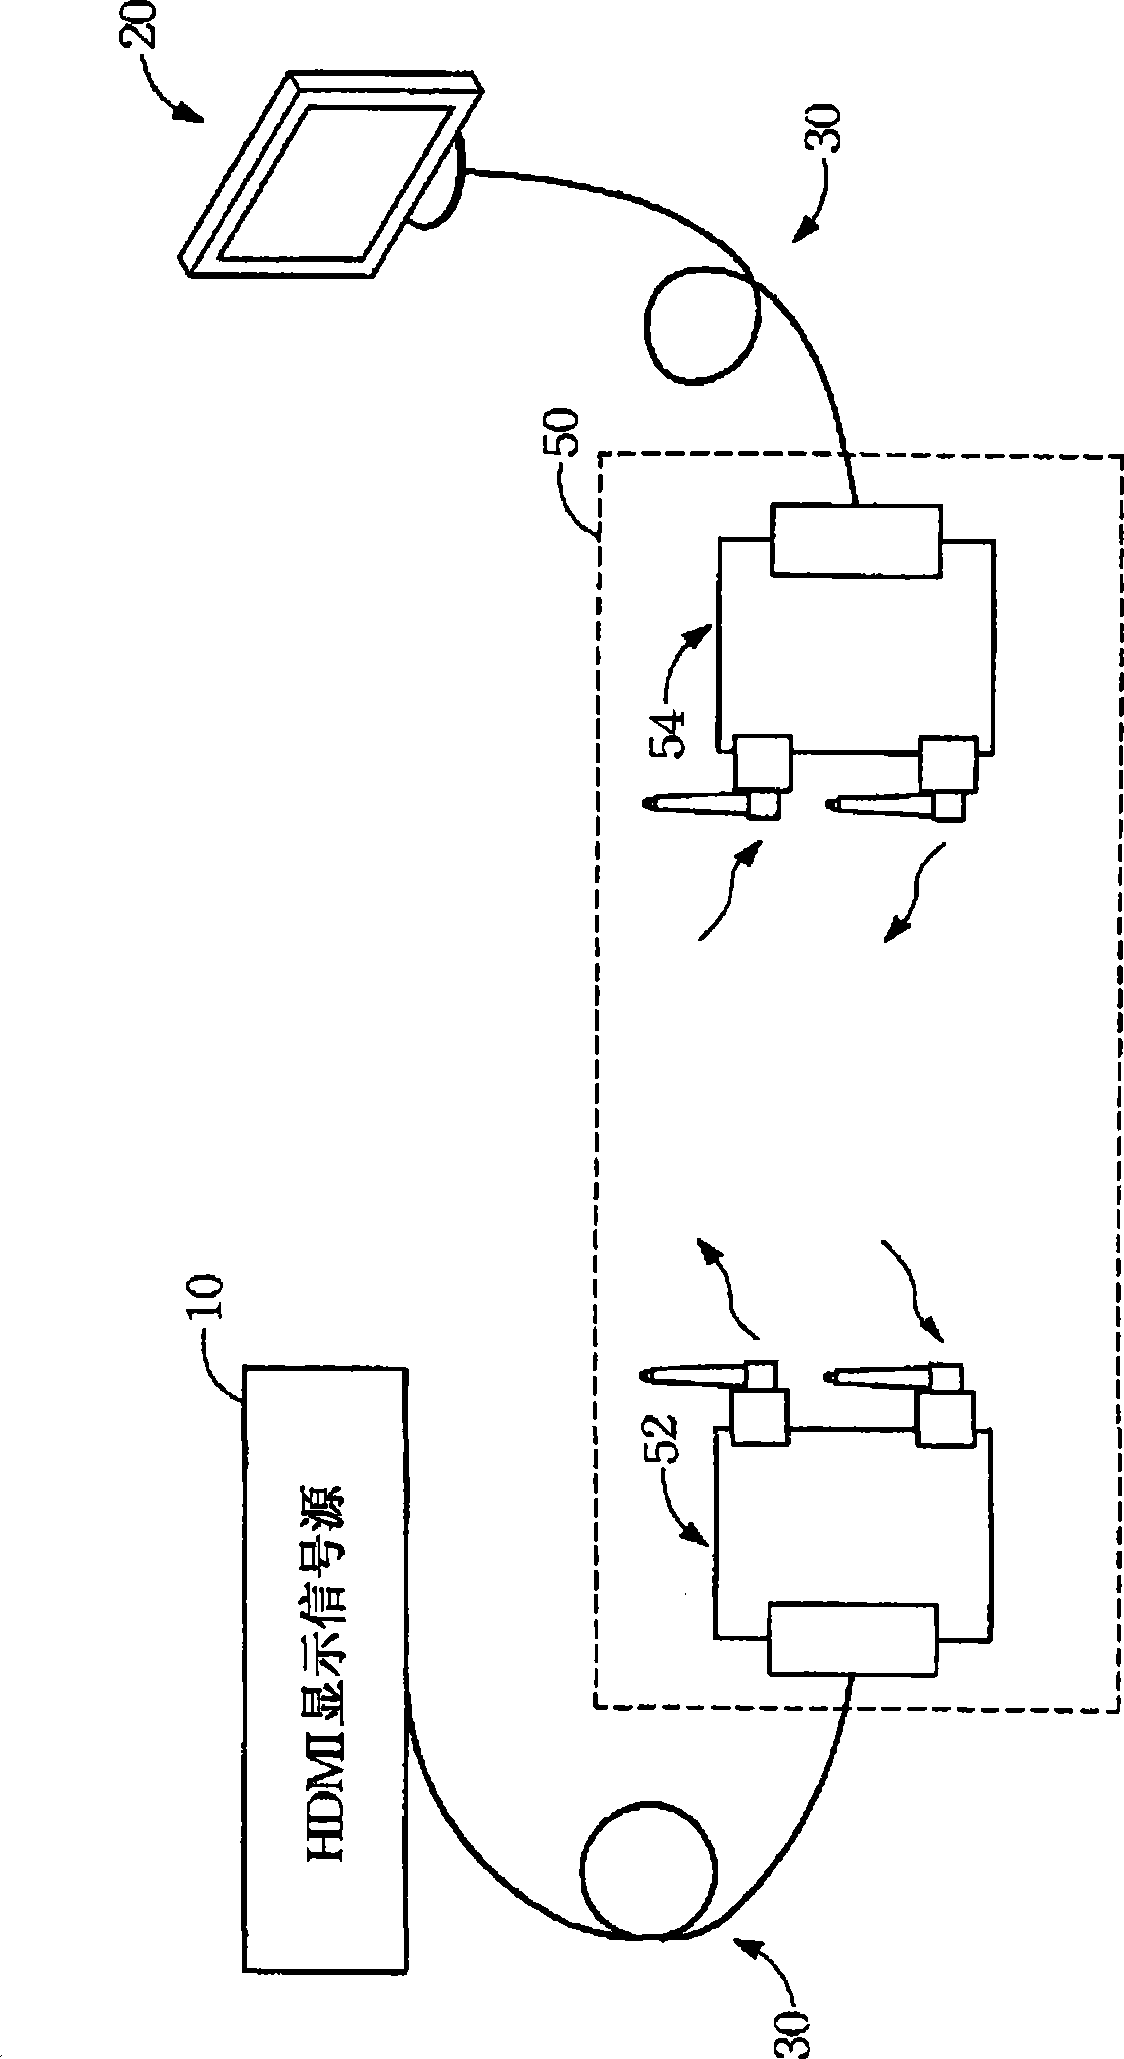 Display signal extending apparatus and method for transmitting display signal therefor